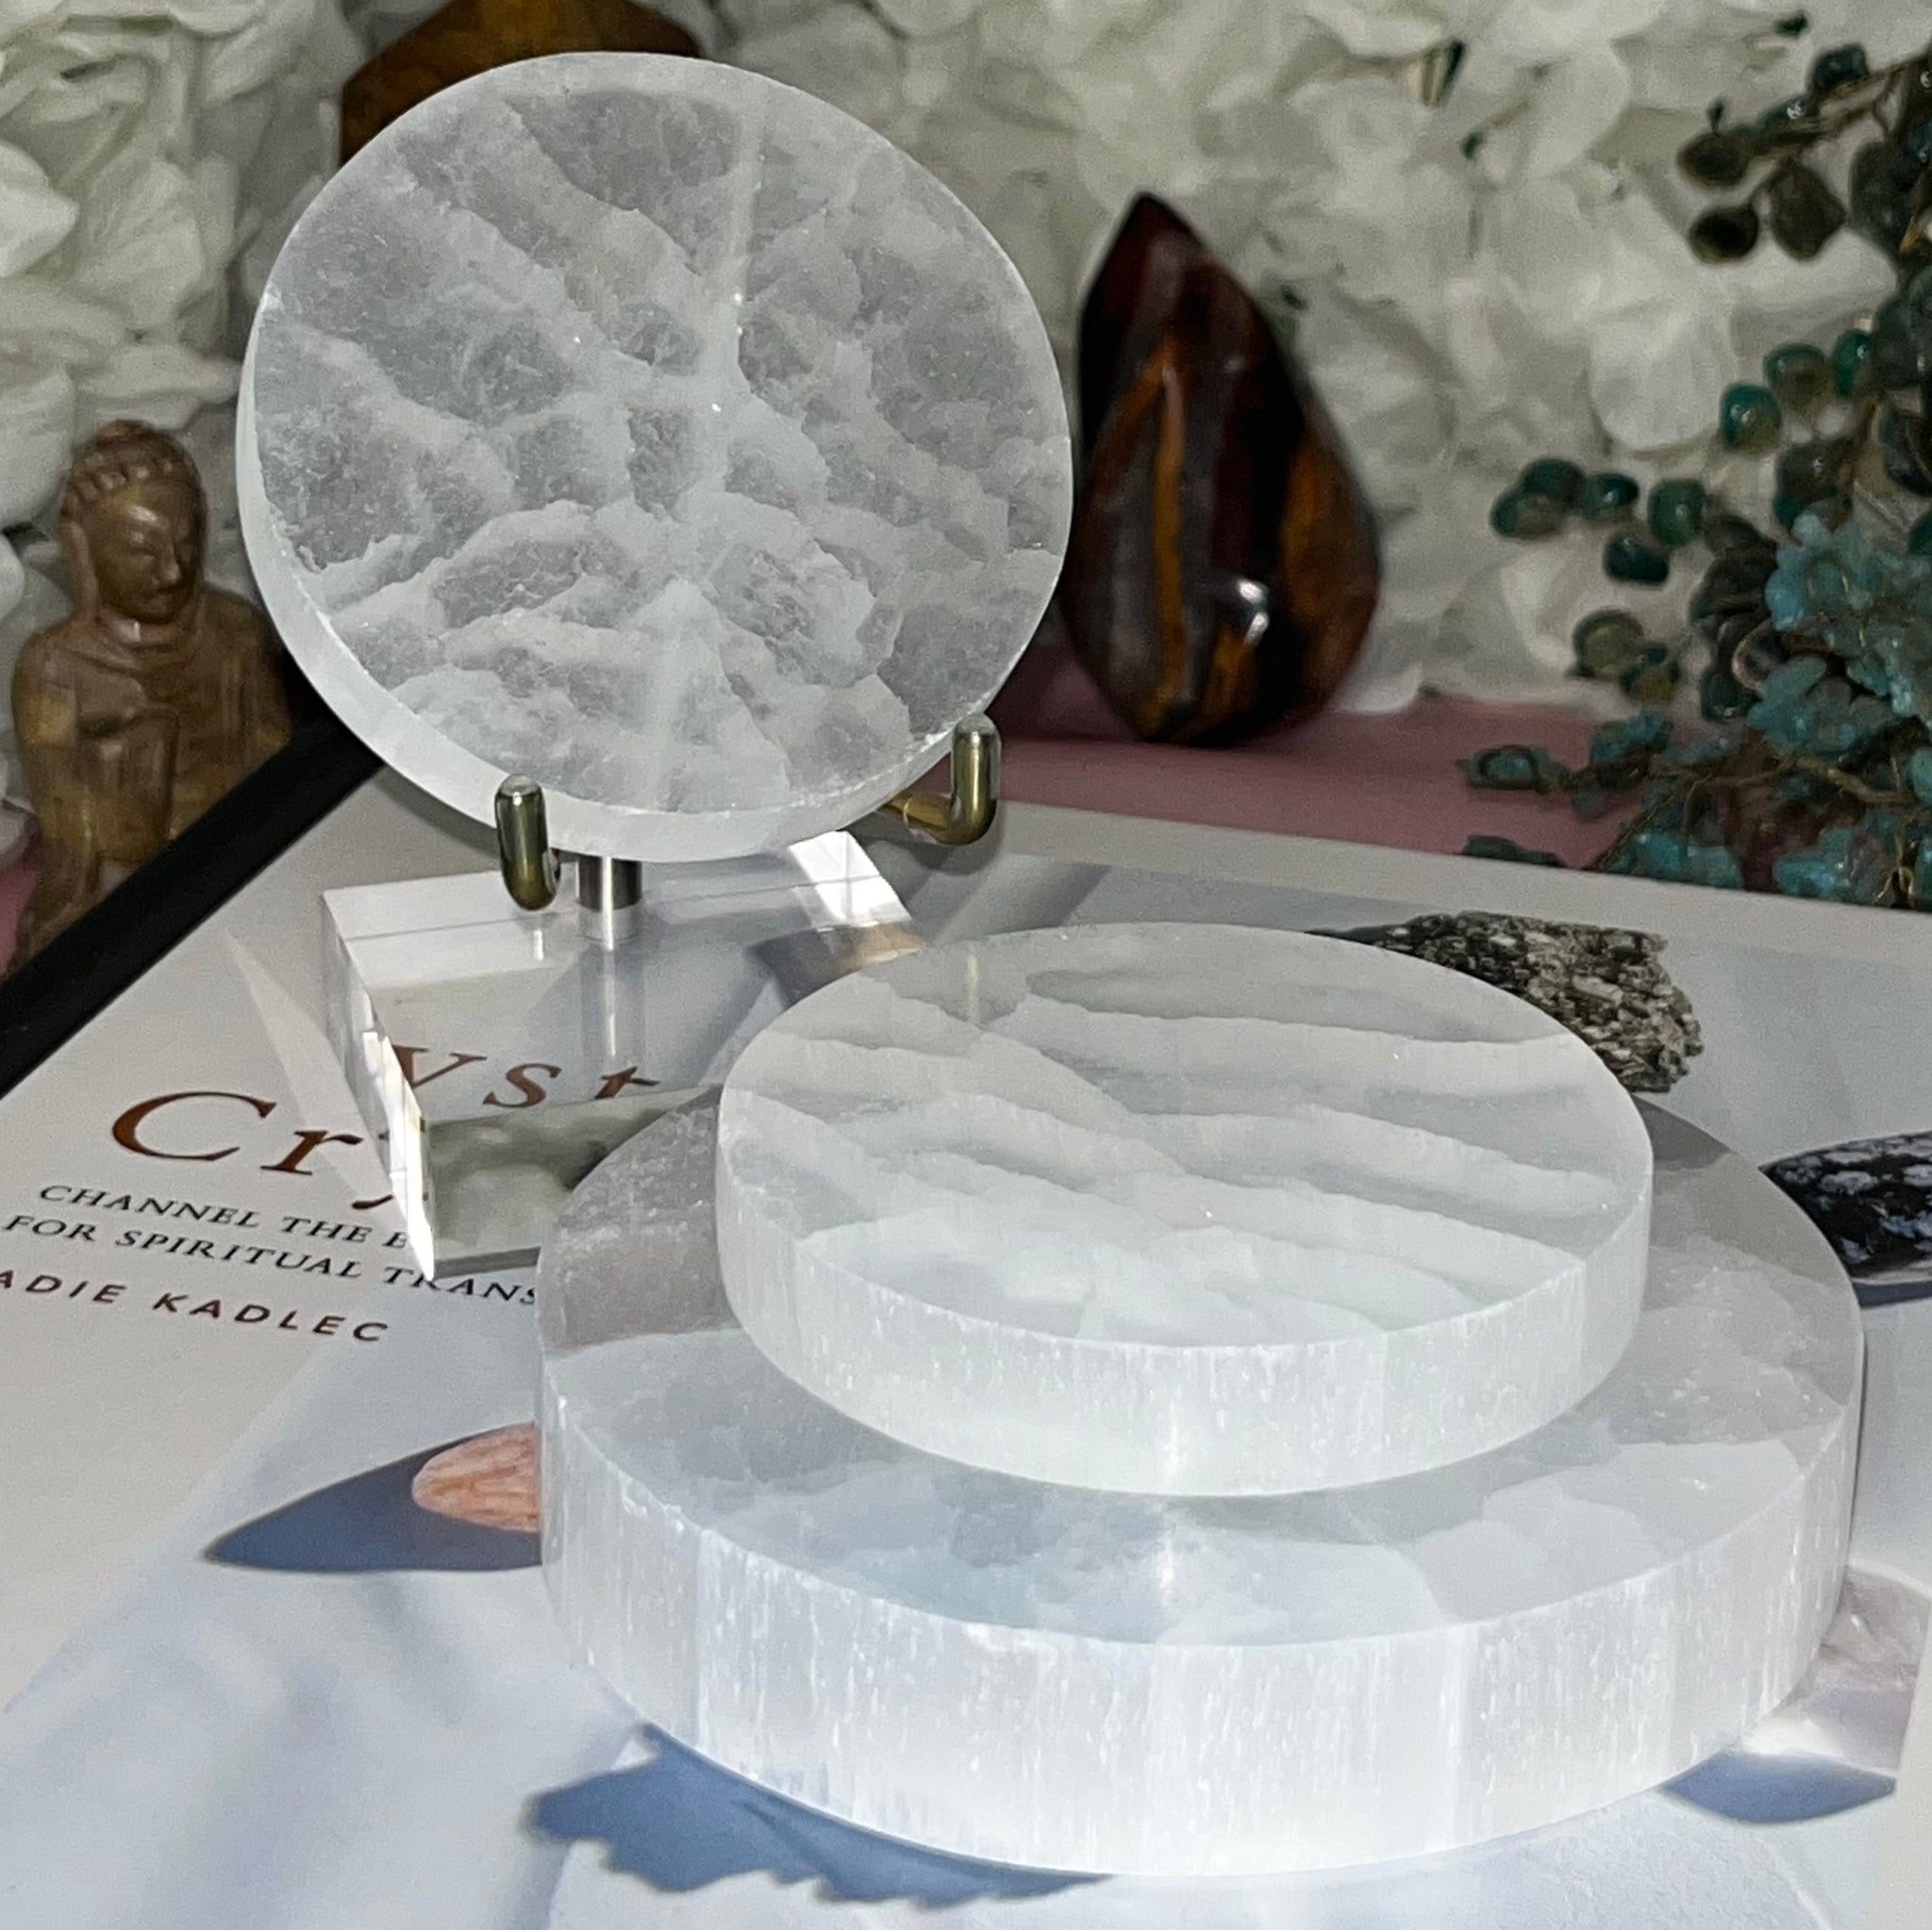 Selenite Charging Disc/Plate - Cleansing & Purification